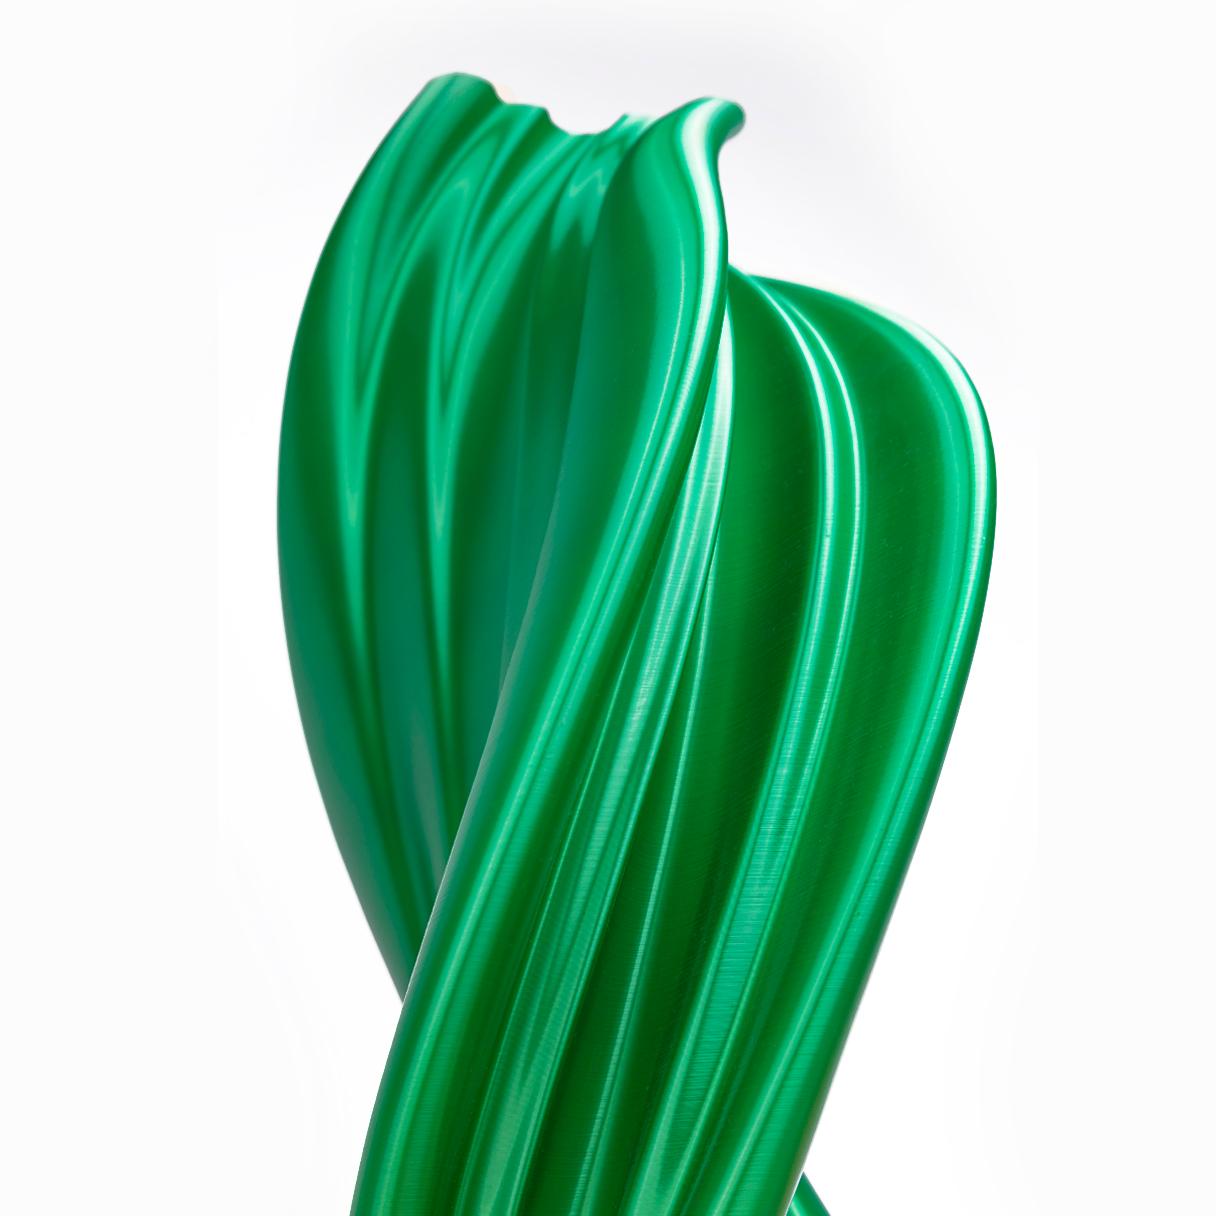 Damocle, Green Contemporary Sustainable Vase-Sculpture 2